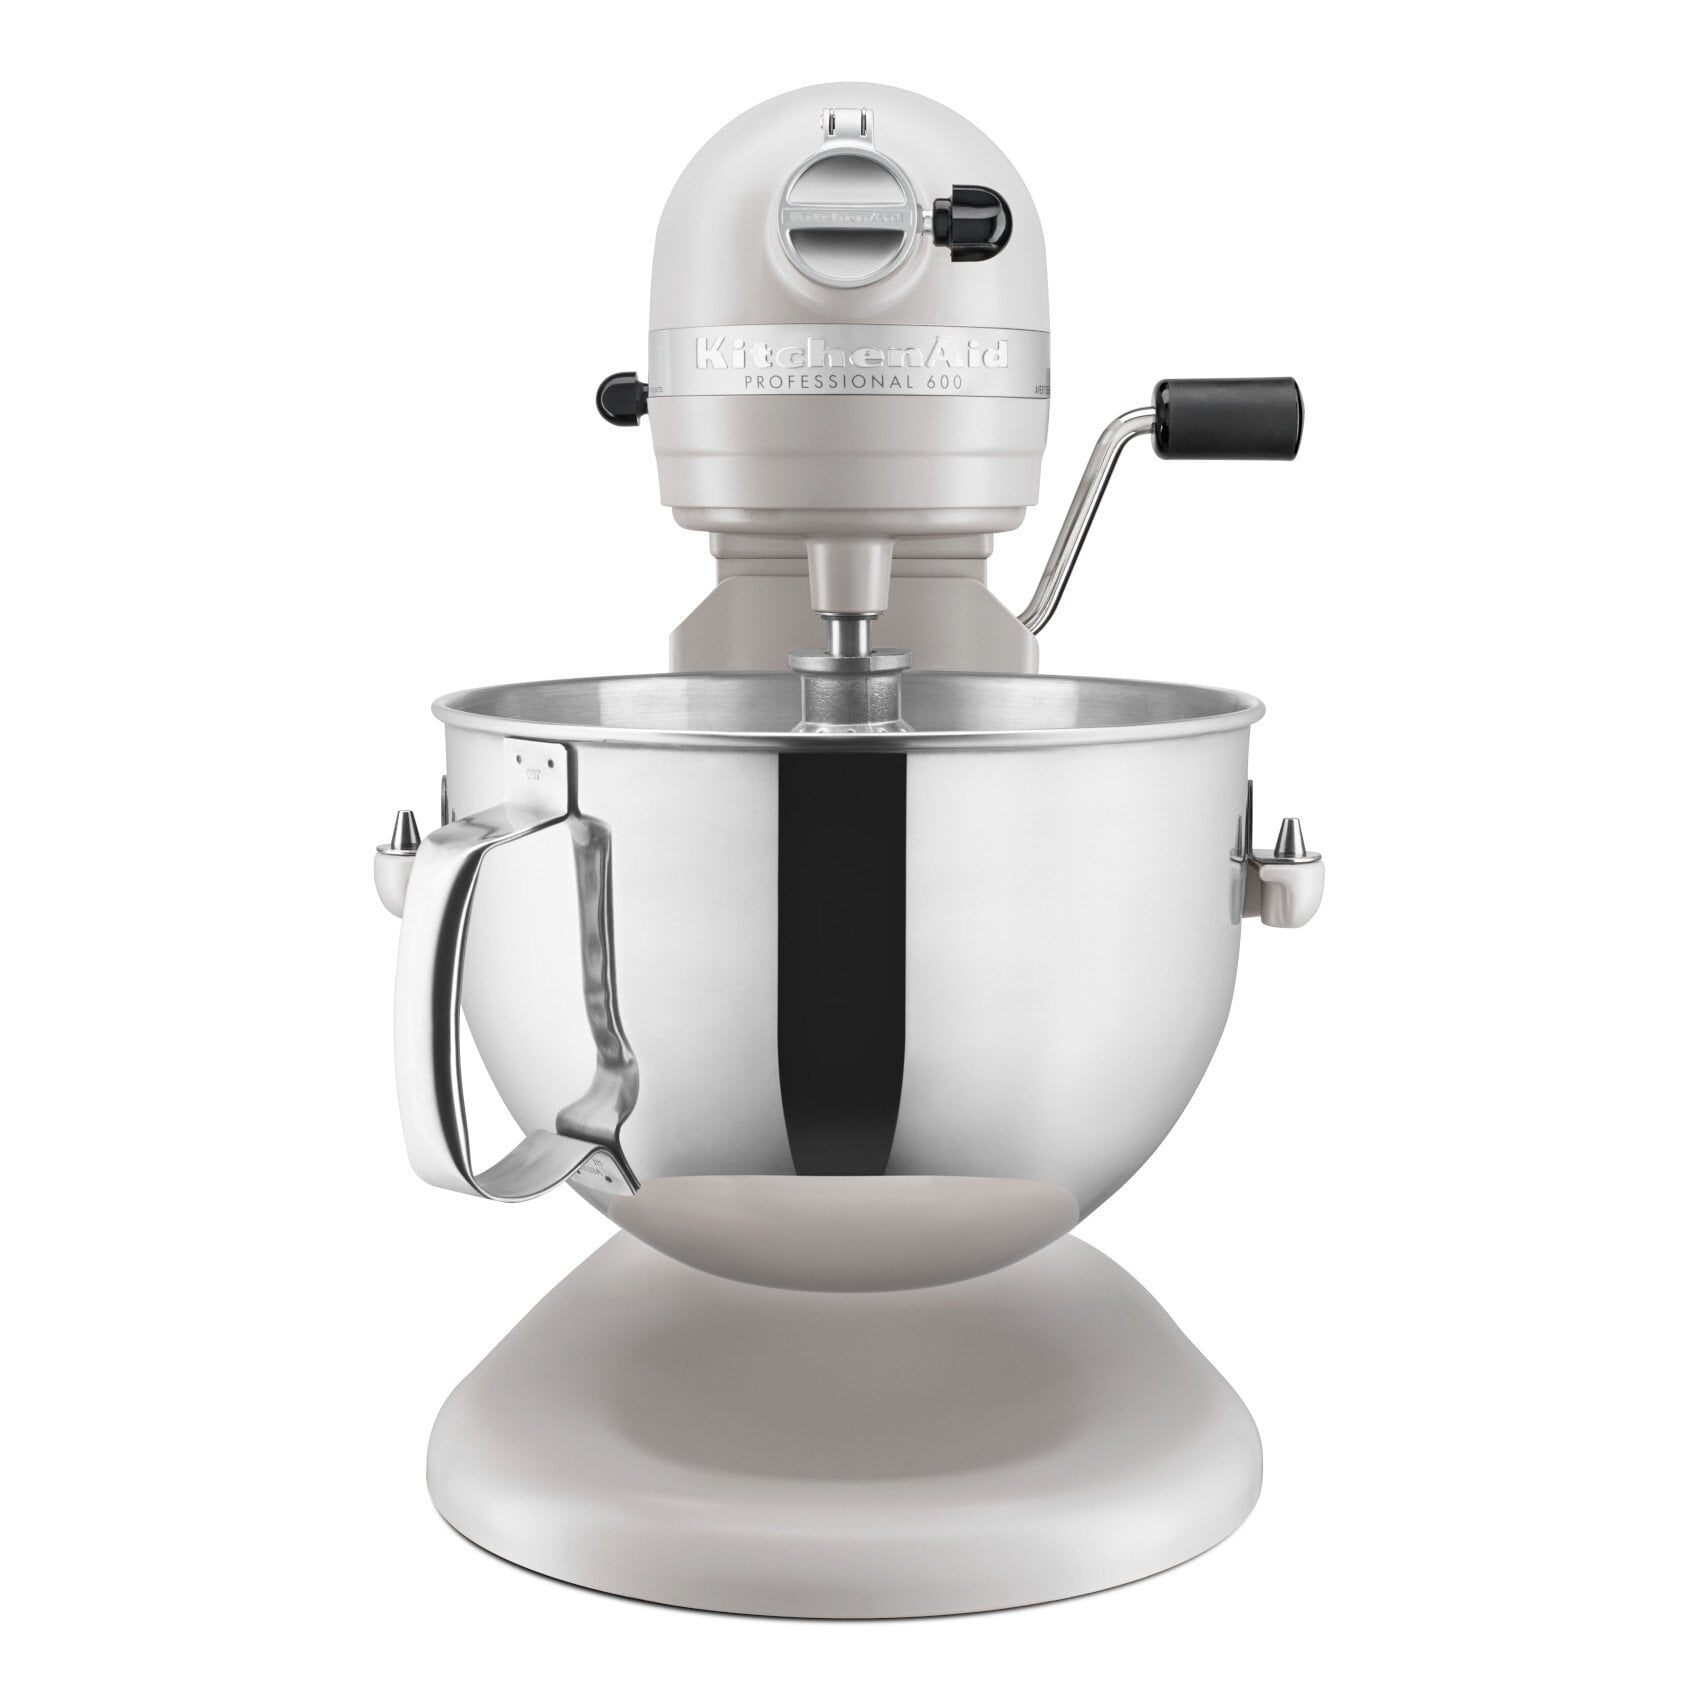 Kitchenaid Professional 600 Series 6 Quart Bowl-lift Stand Mixer for Sale  in Seattle, WA - OfferUp